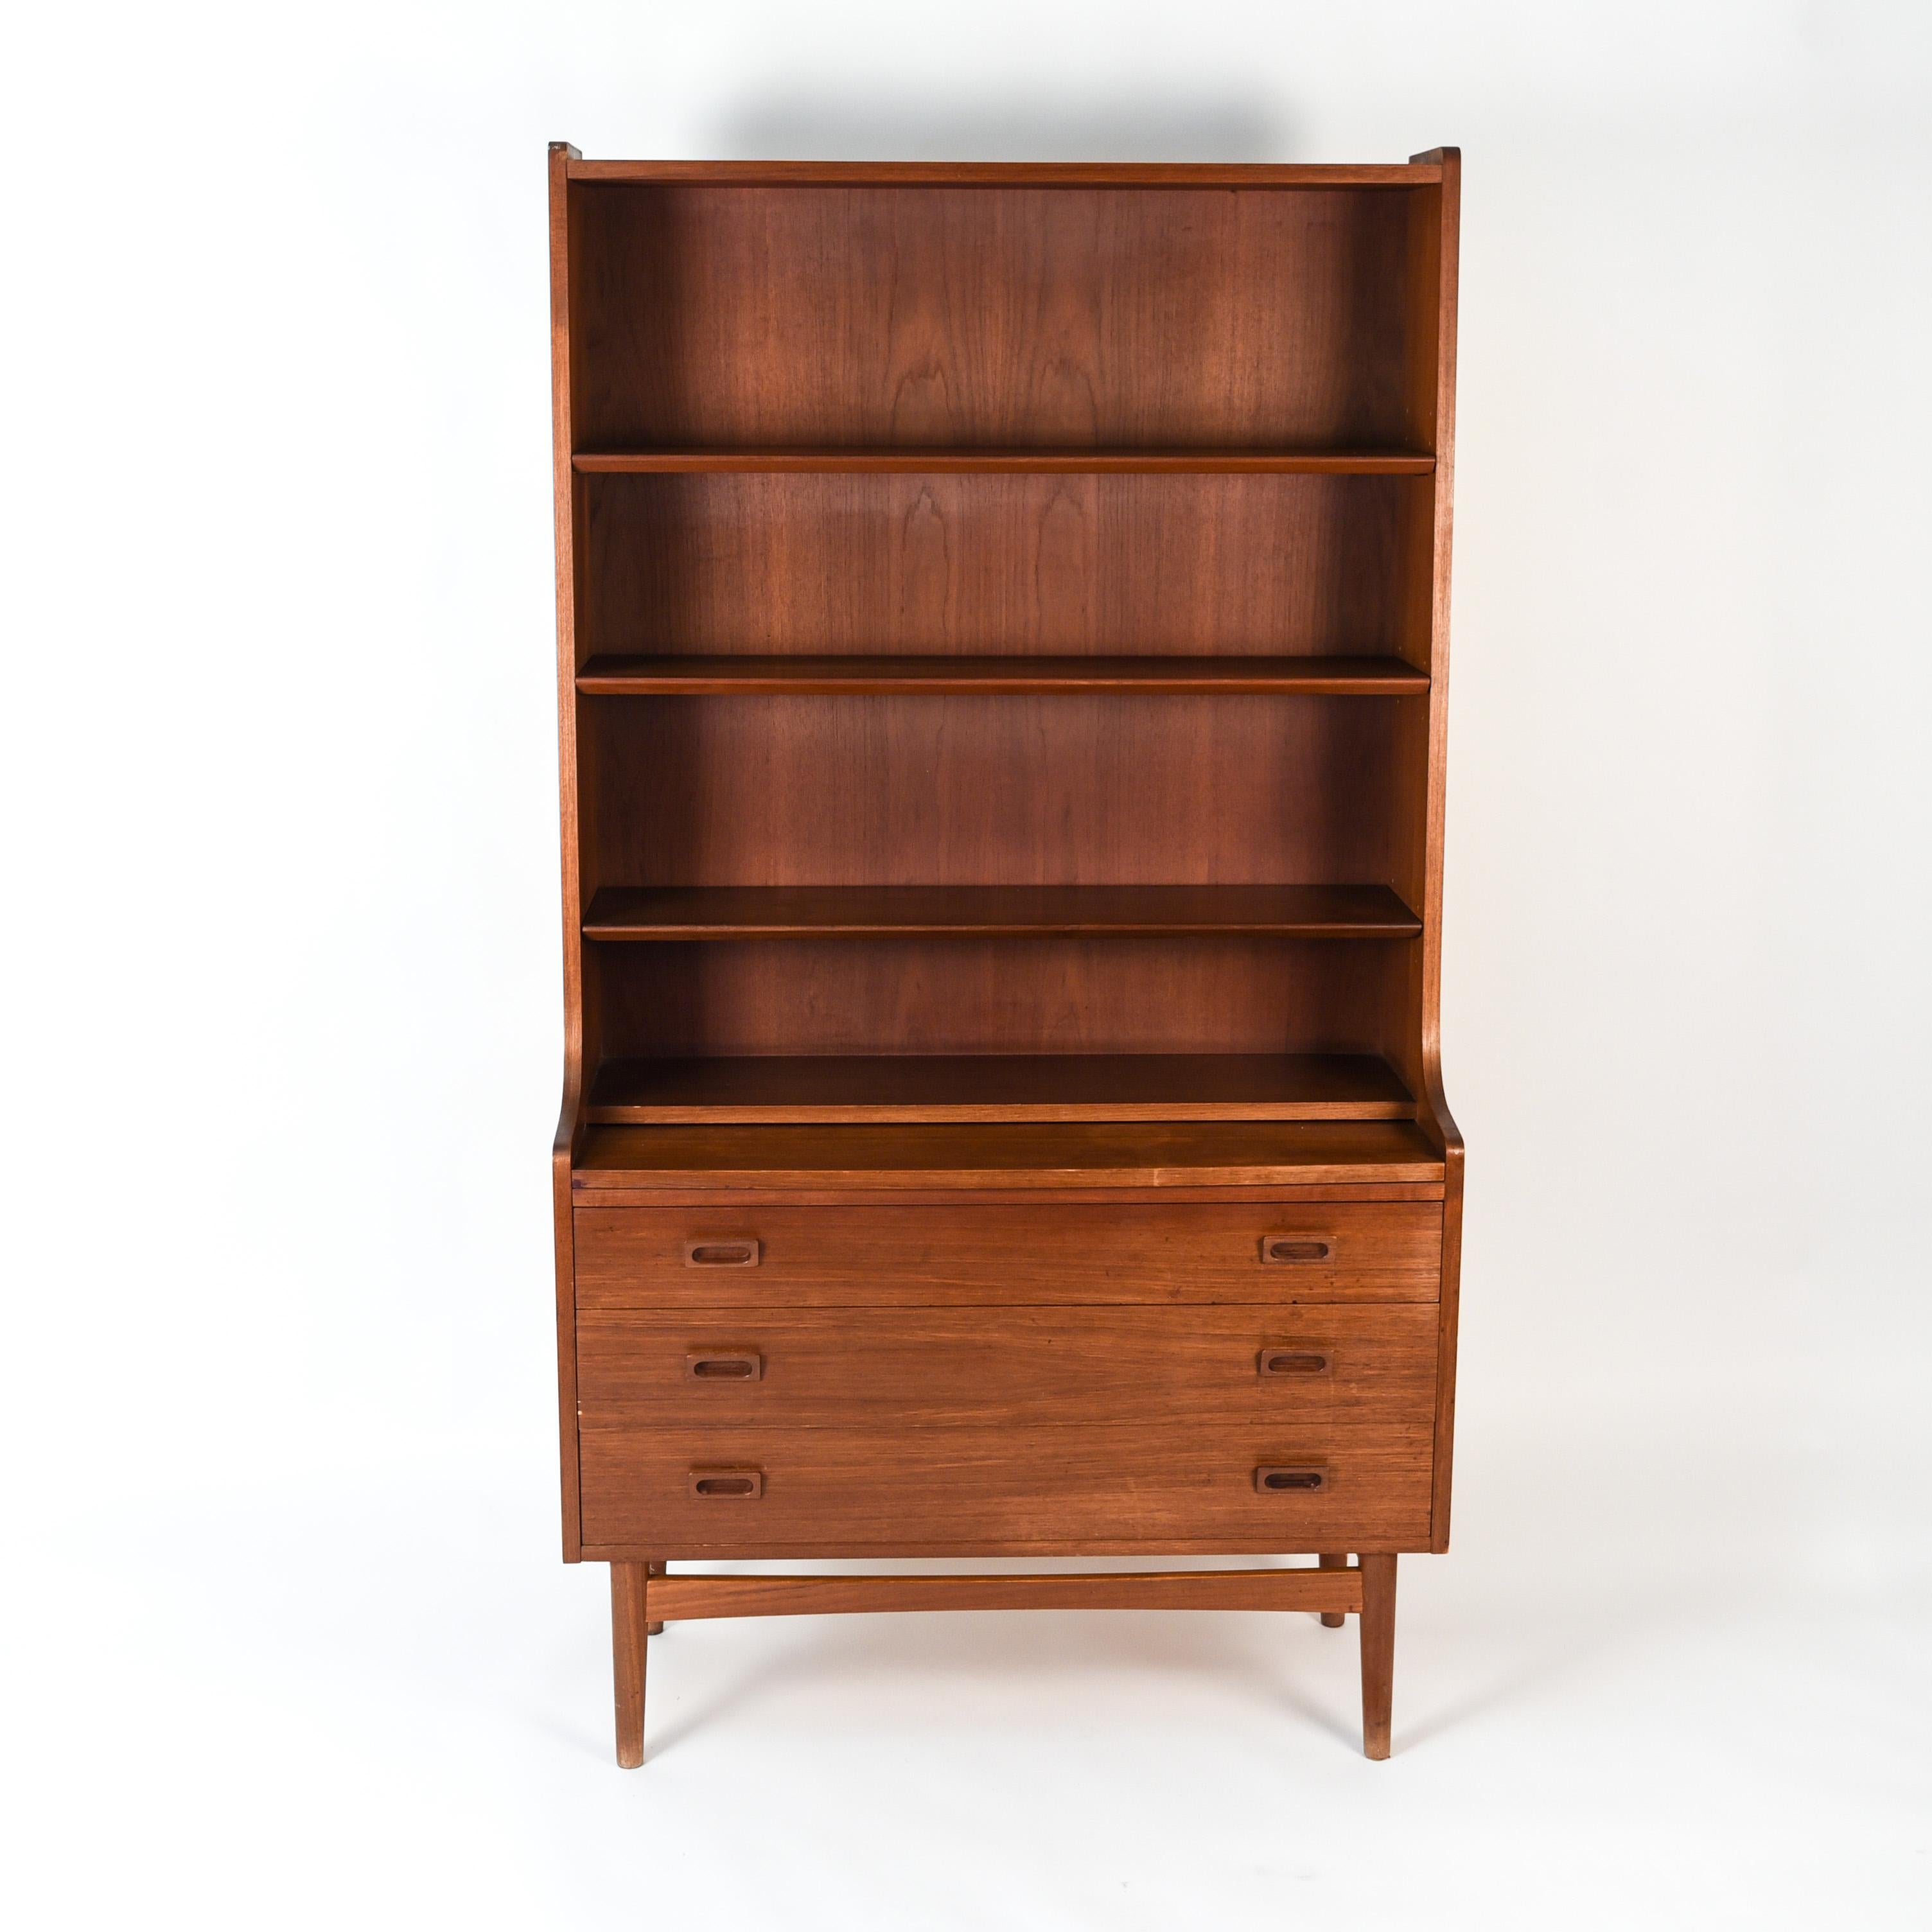 This teak bookcase or secretary was designed by Johannes Sorth for Bornholm Møbelfabrik, Nexø. This bookcase features adjustable shelves which sit above three drawers. This doubles as a great storage and display piece, while maintaining the